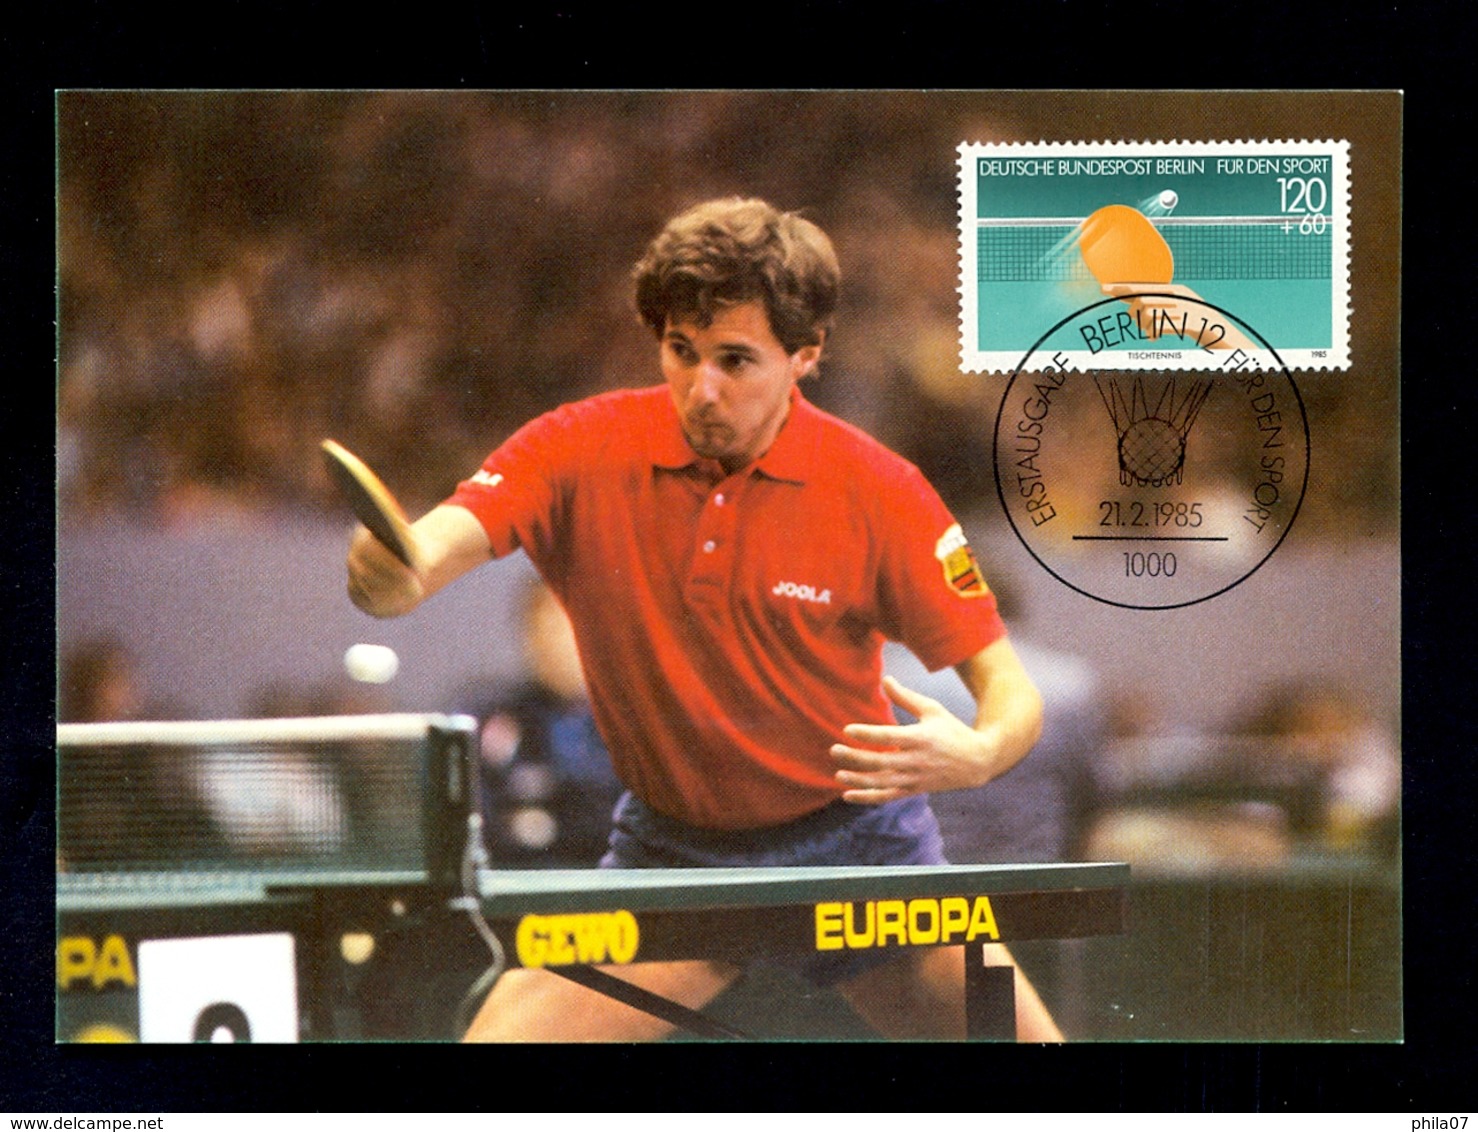 GERMANY 1985 - Commemorative Card, Cancel And Stamp For TABLE TENNIS - Tafeltennis